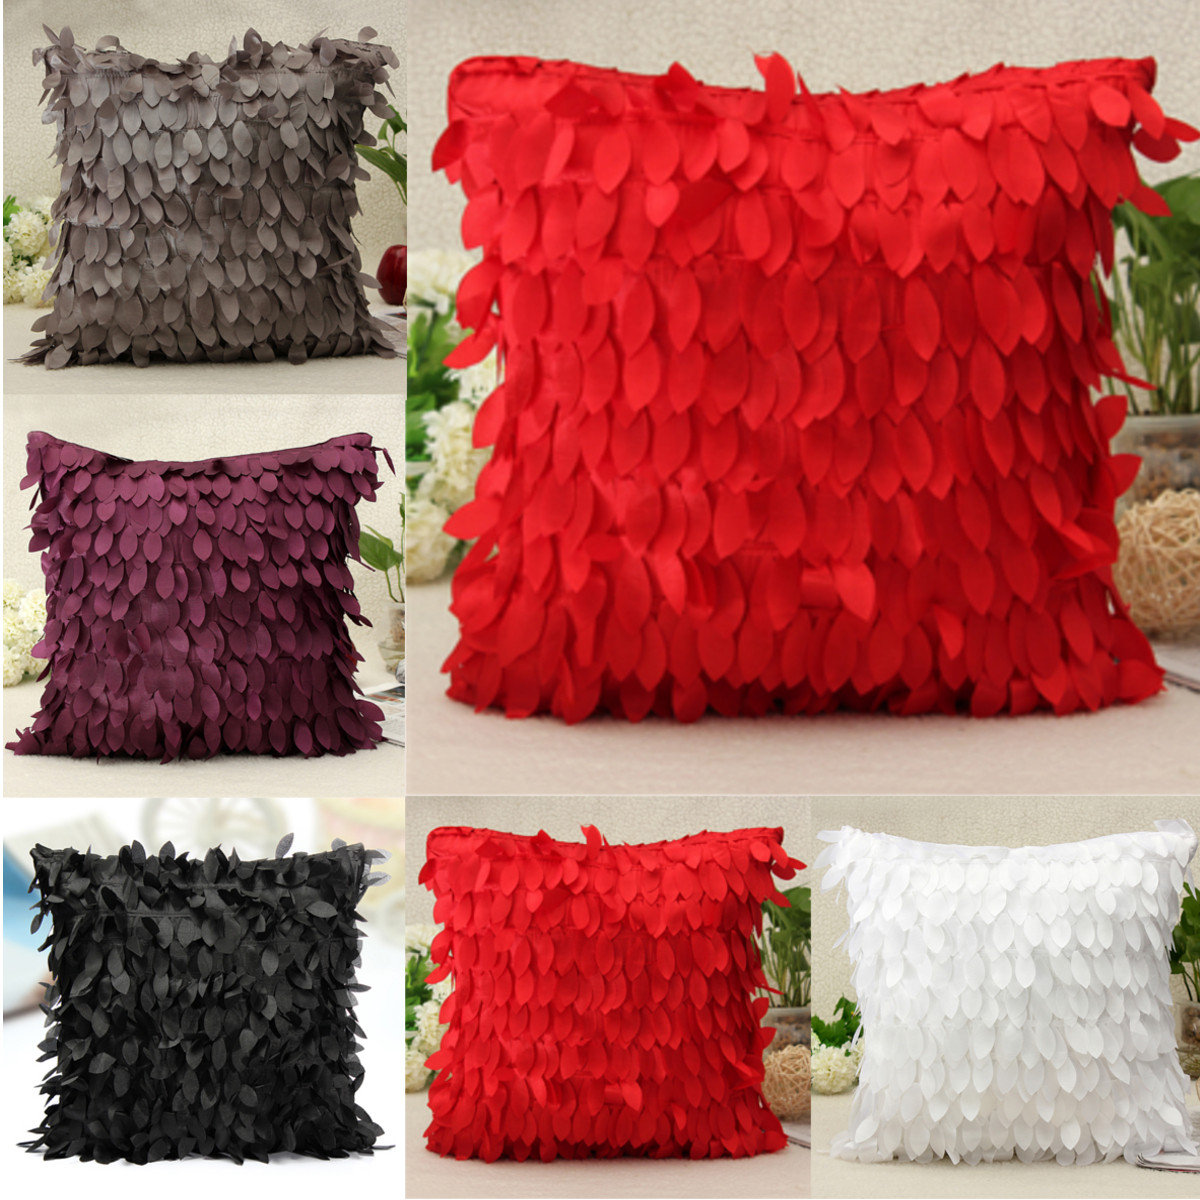 

Satin Leavese Design Pillow Case Home Office Car Cushion Cover, Red purple grey black white